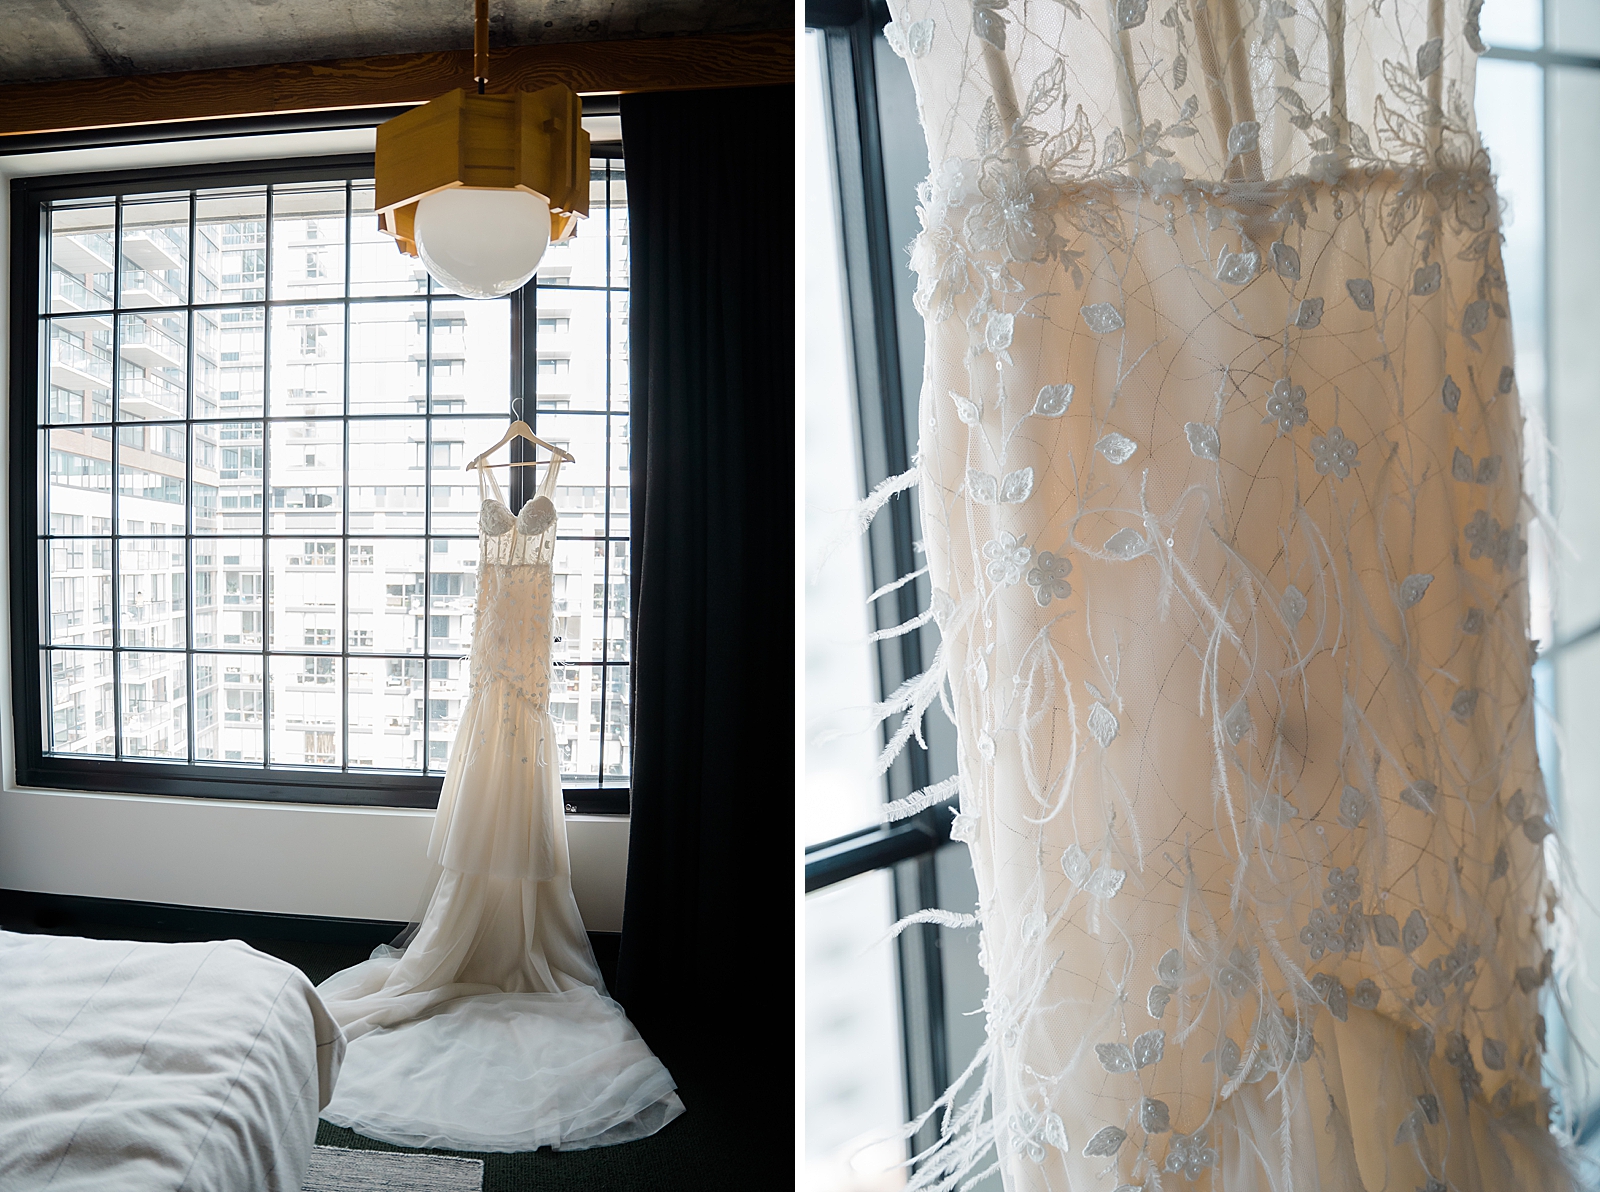 Left photo: Bride's wedding gown hanging in front of a window.
Right photo: Close up of bride's wedding gown. 